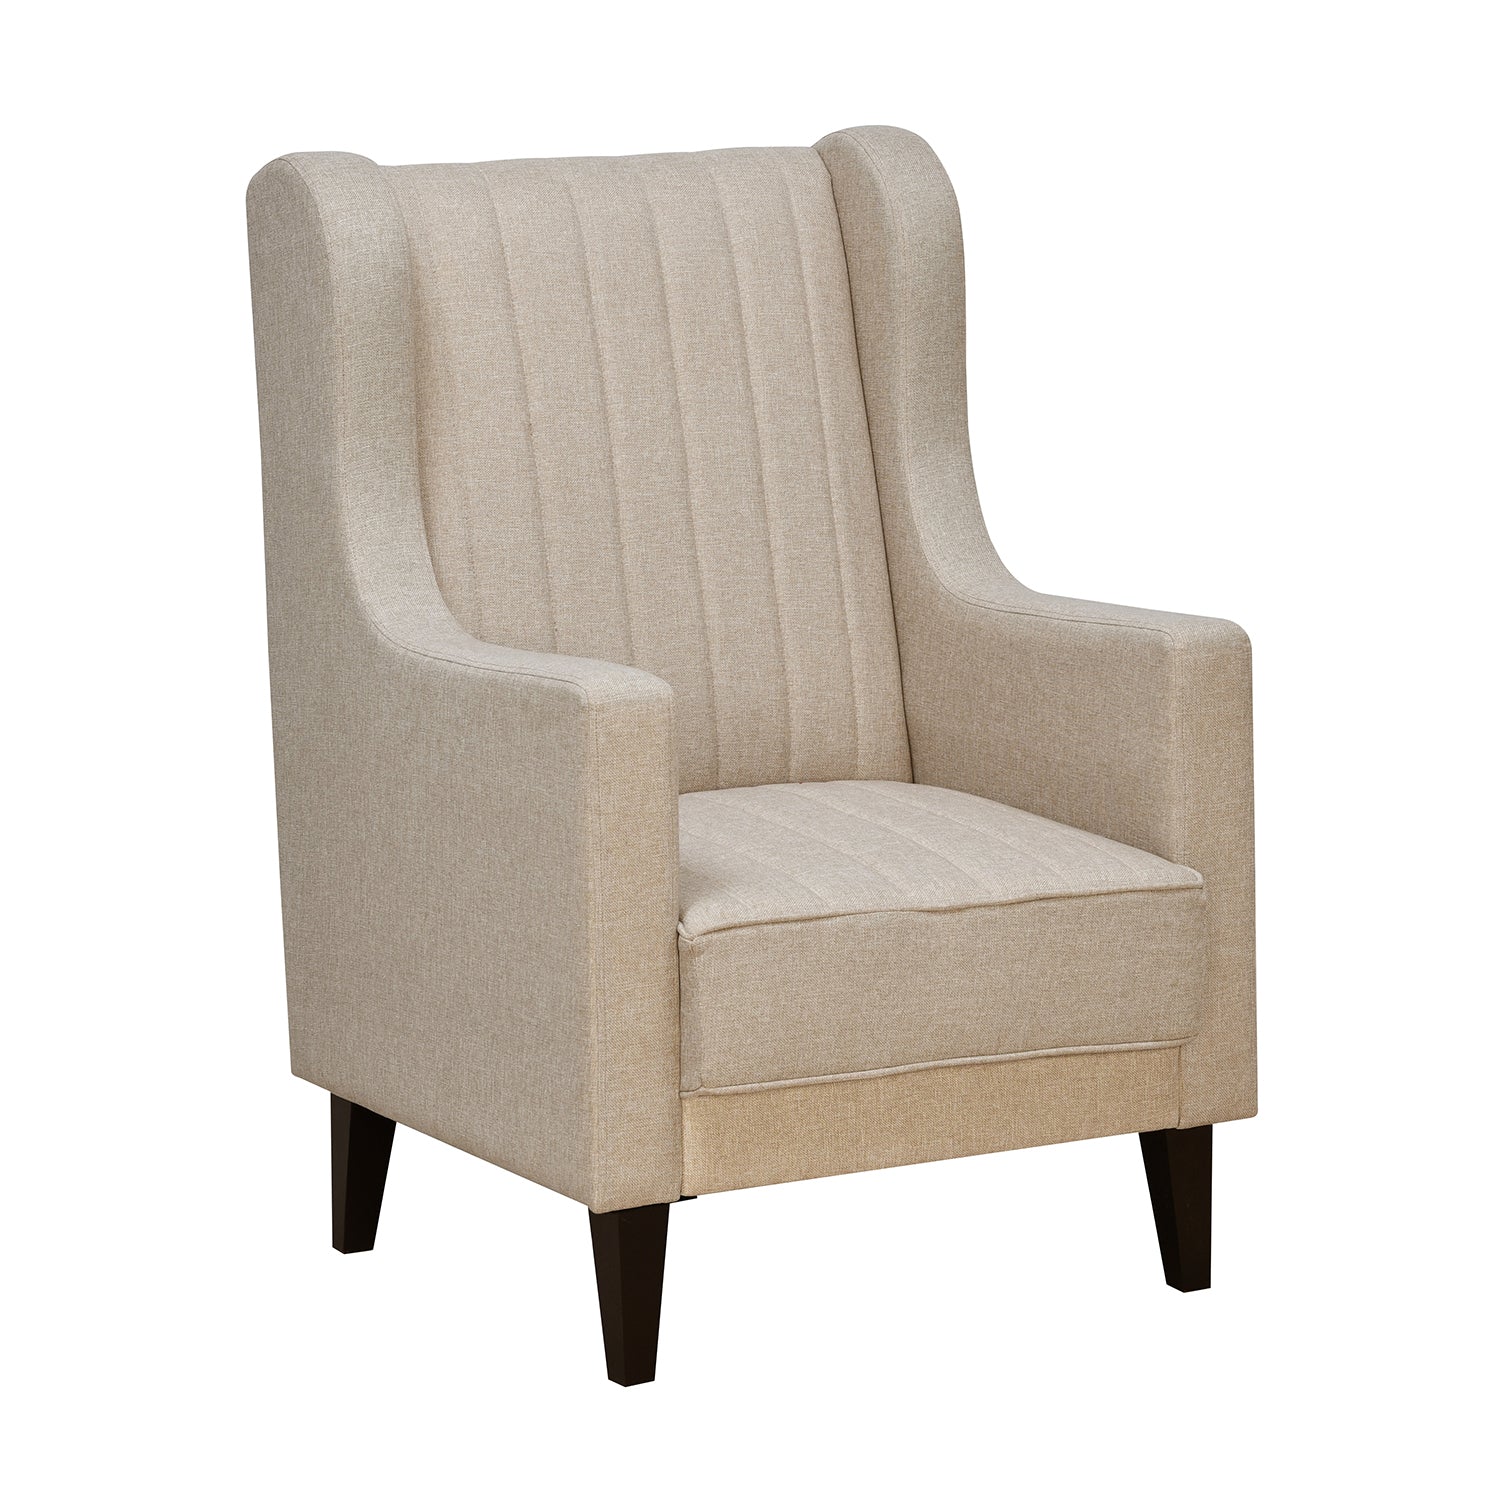 Leroy Fabric Upholstered Wingback Arm Chair (Beige)